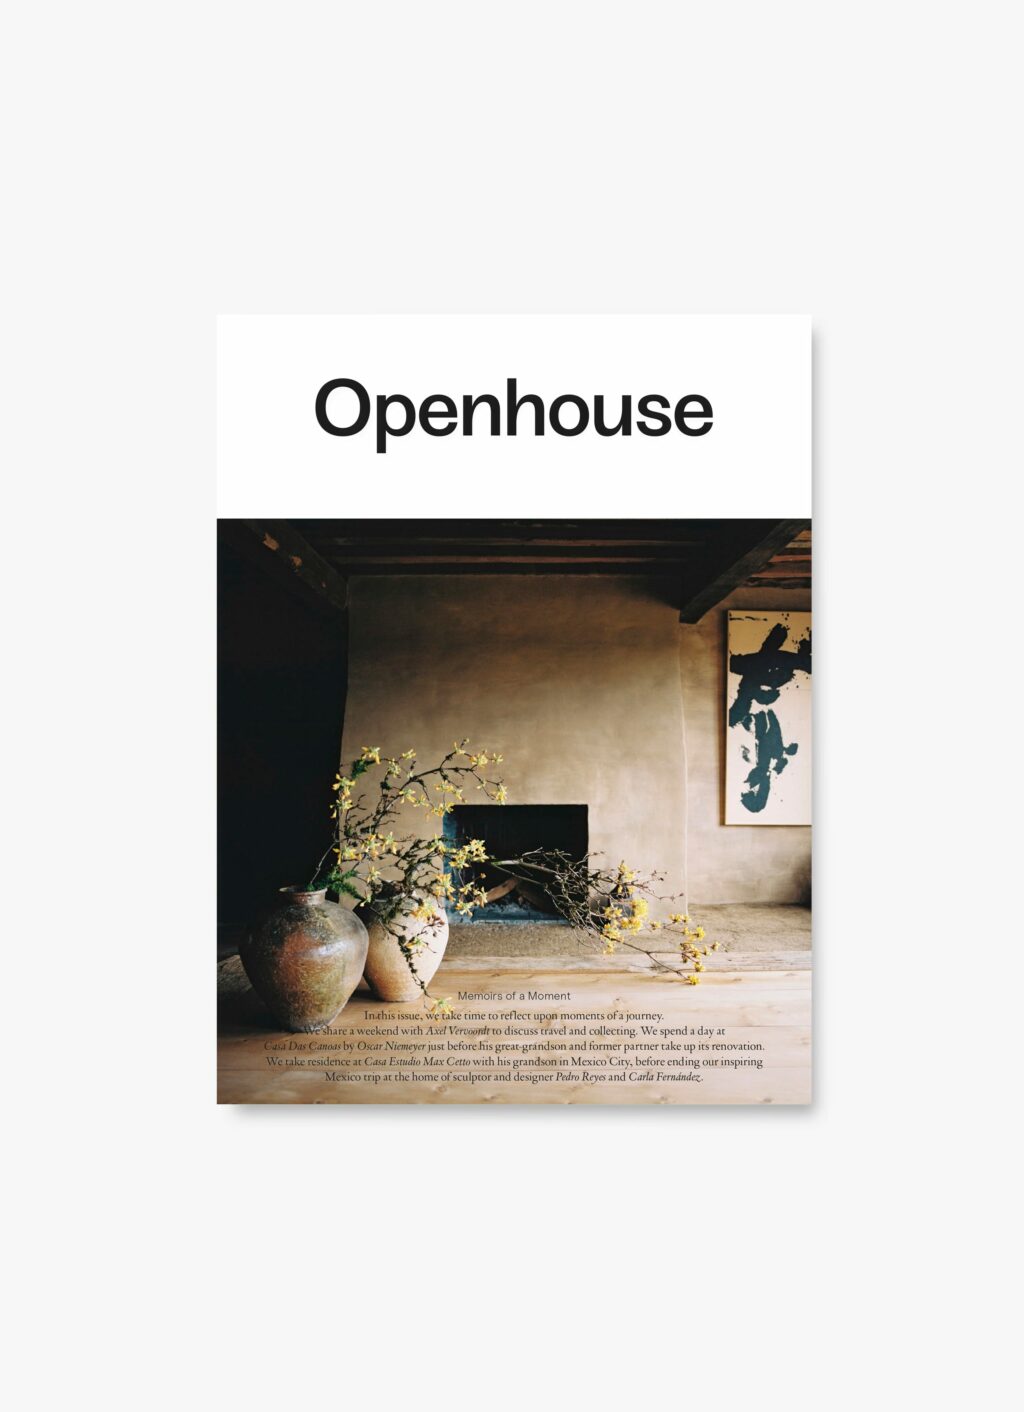 Openhouse Magazine - Issue 13 - Memoirs of a Moment